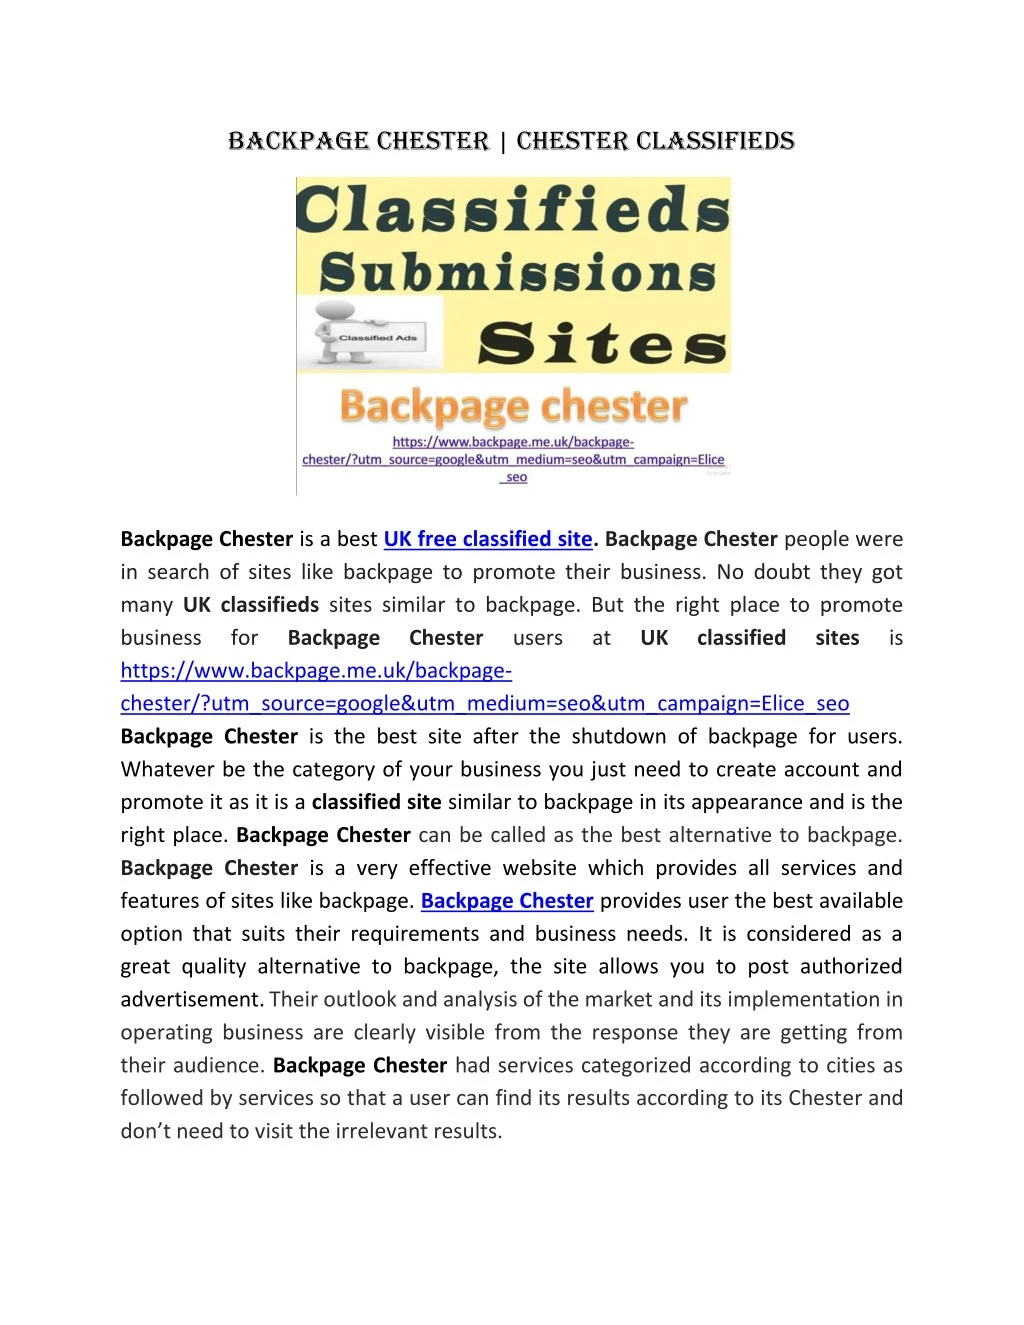 backpage chester chester classifieds